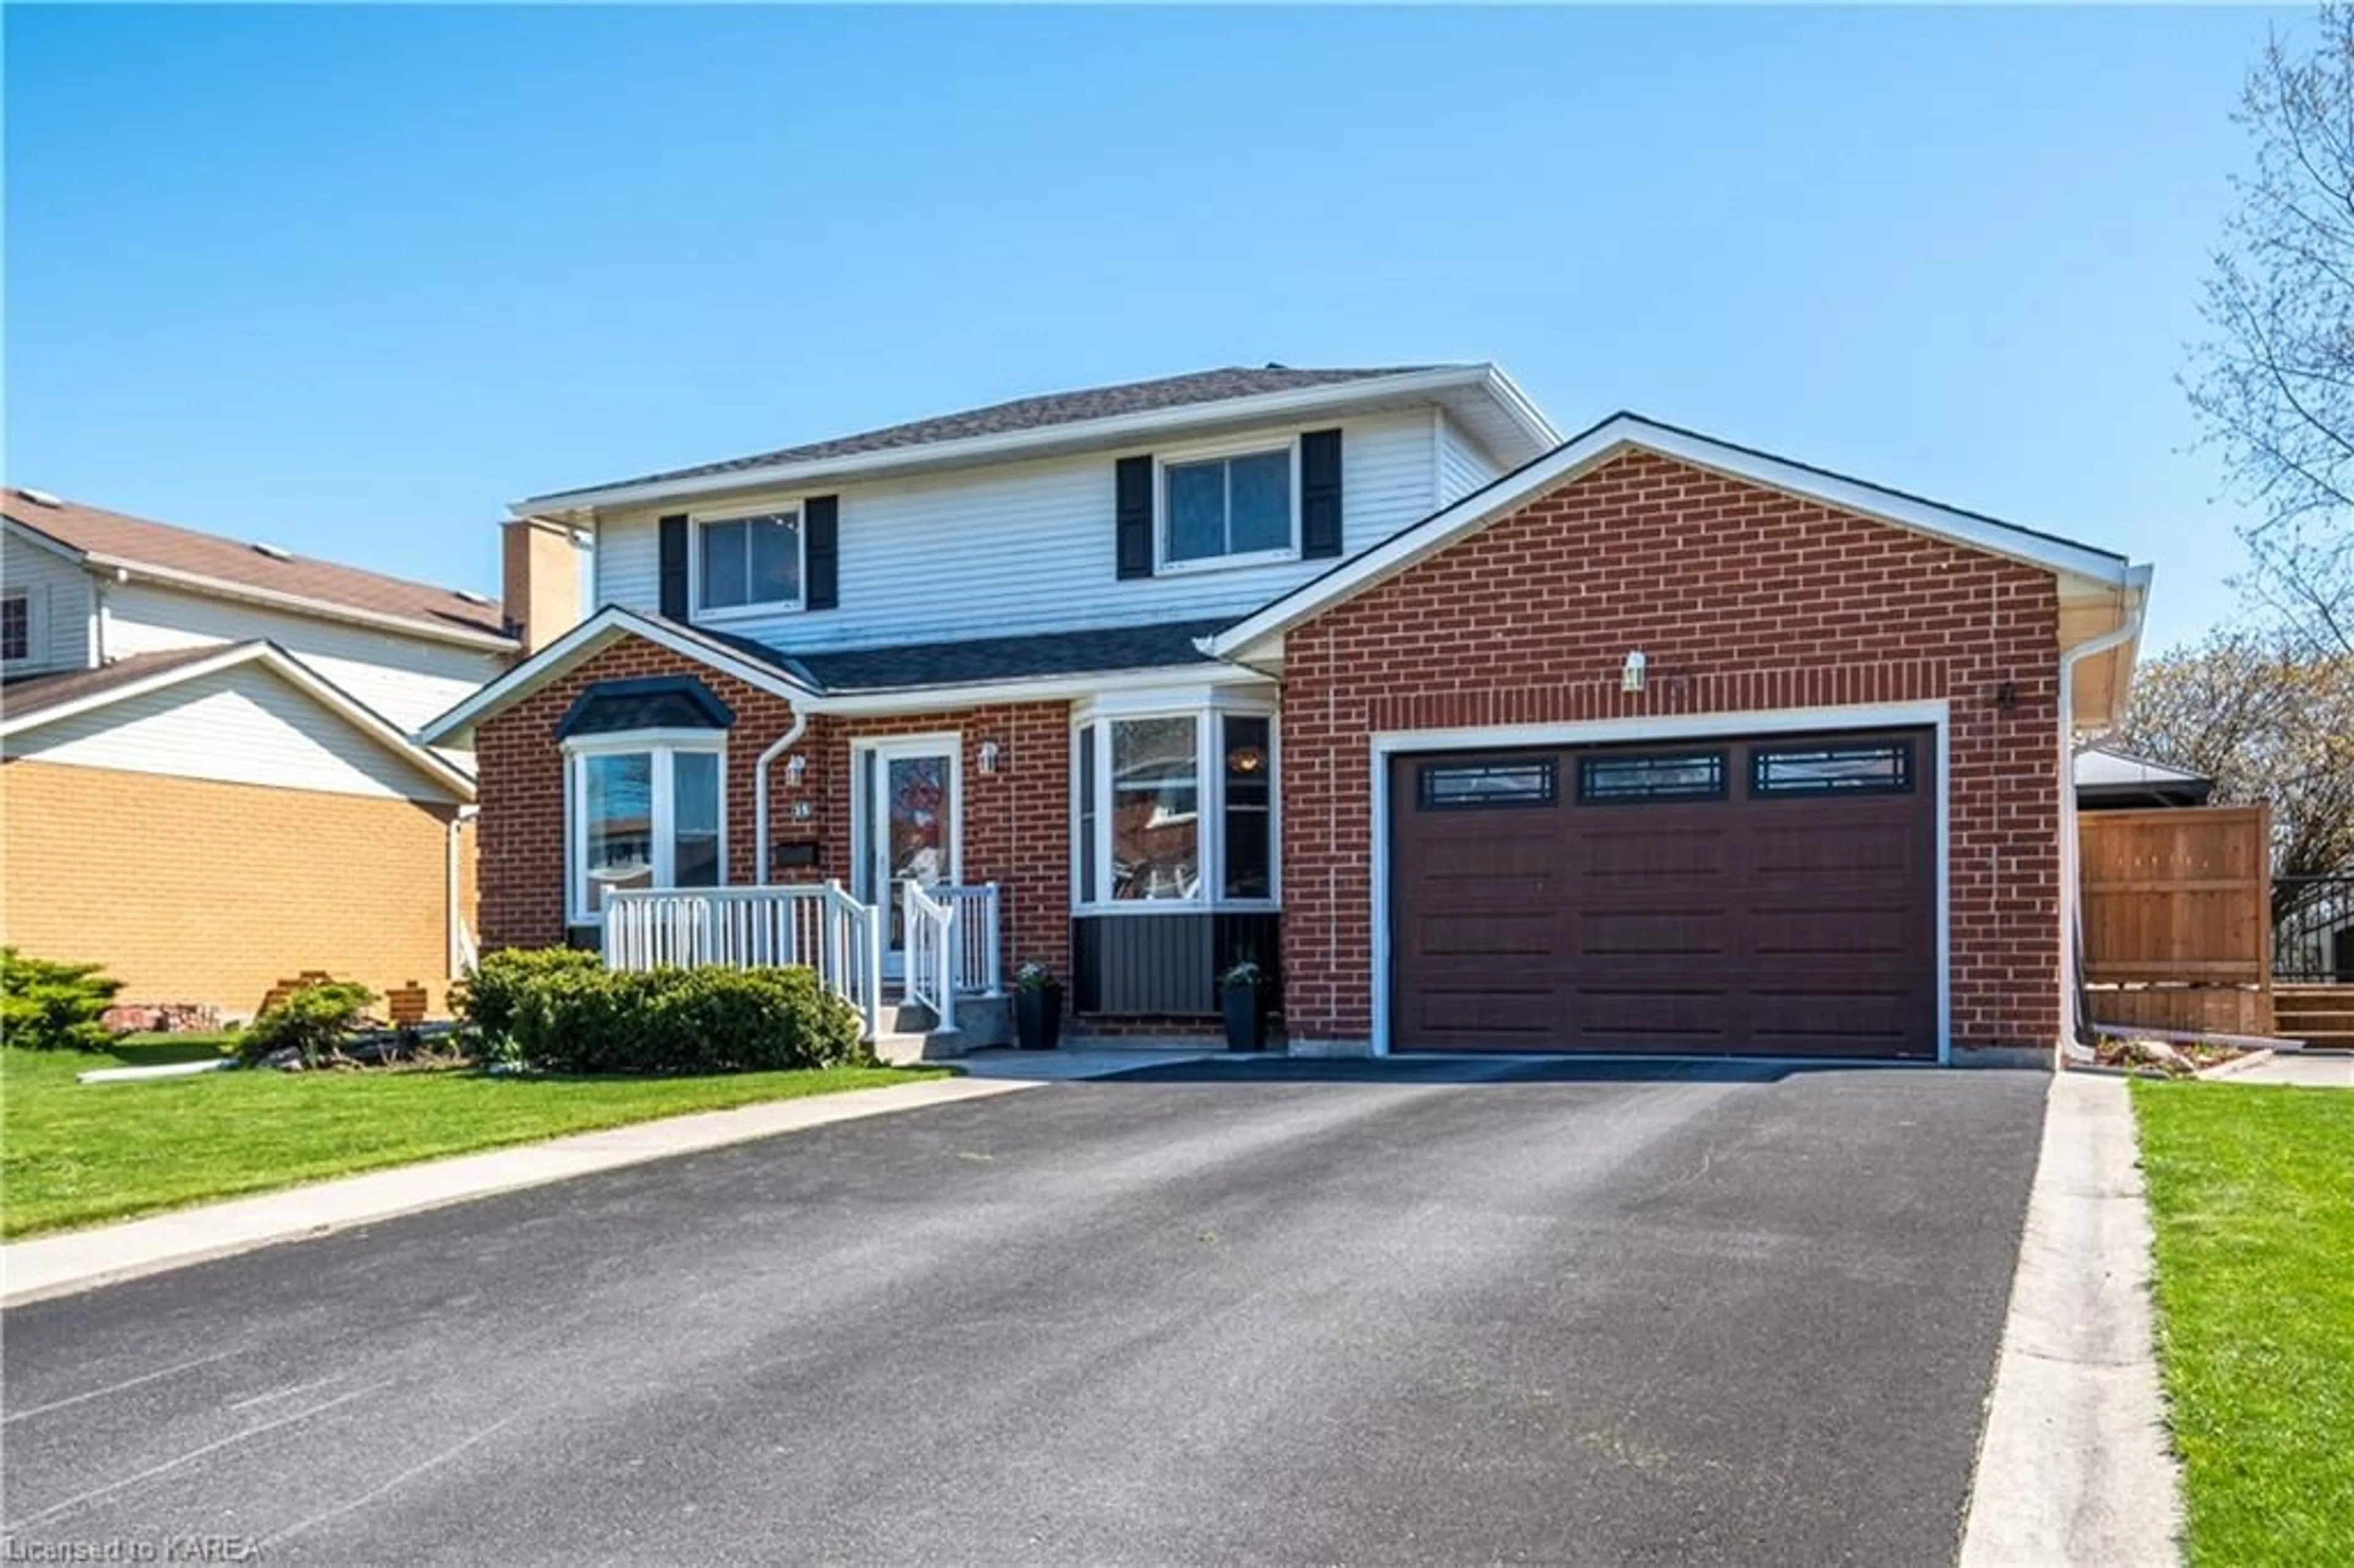 Home with brick exterior material for 15 Chartwell Cres, Kingston Ontario K7K 6M4